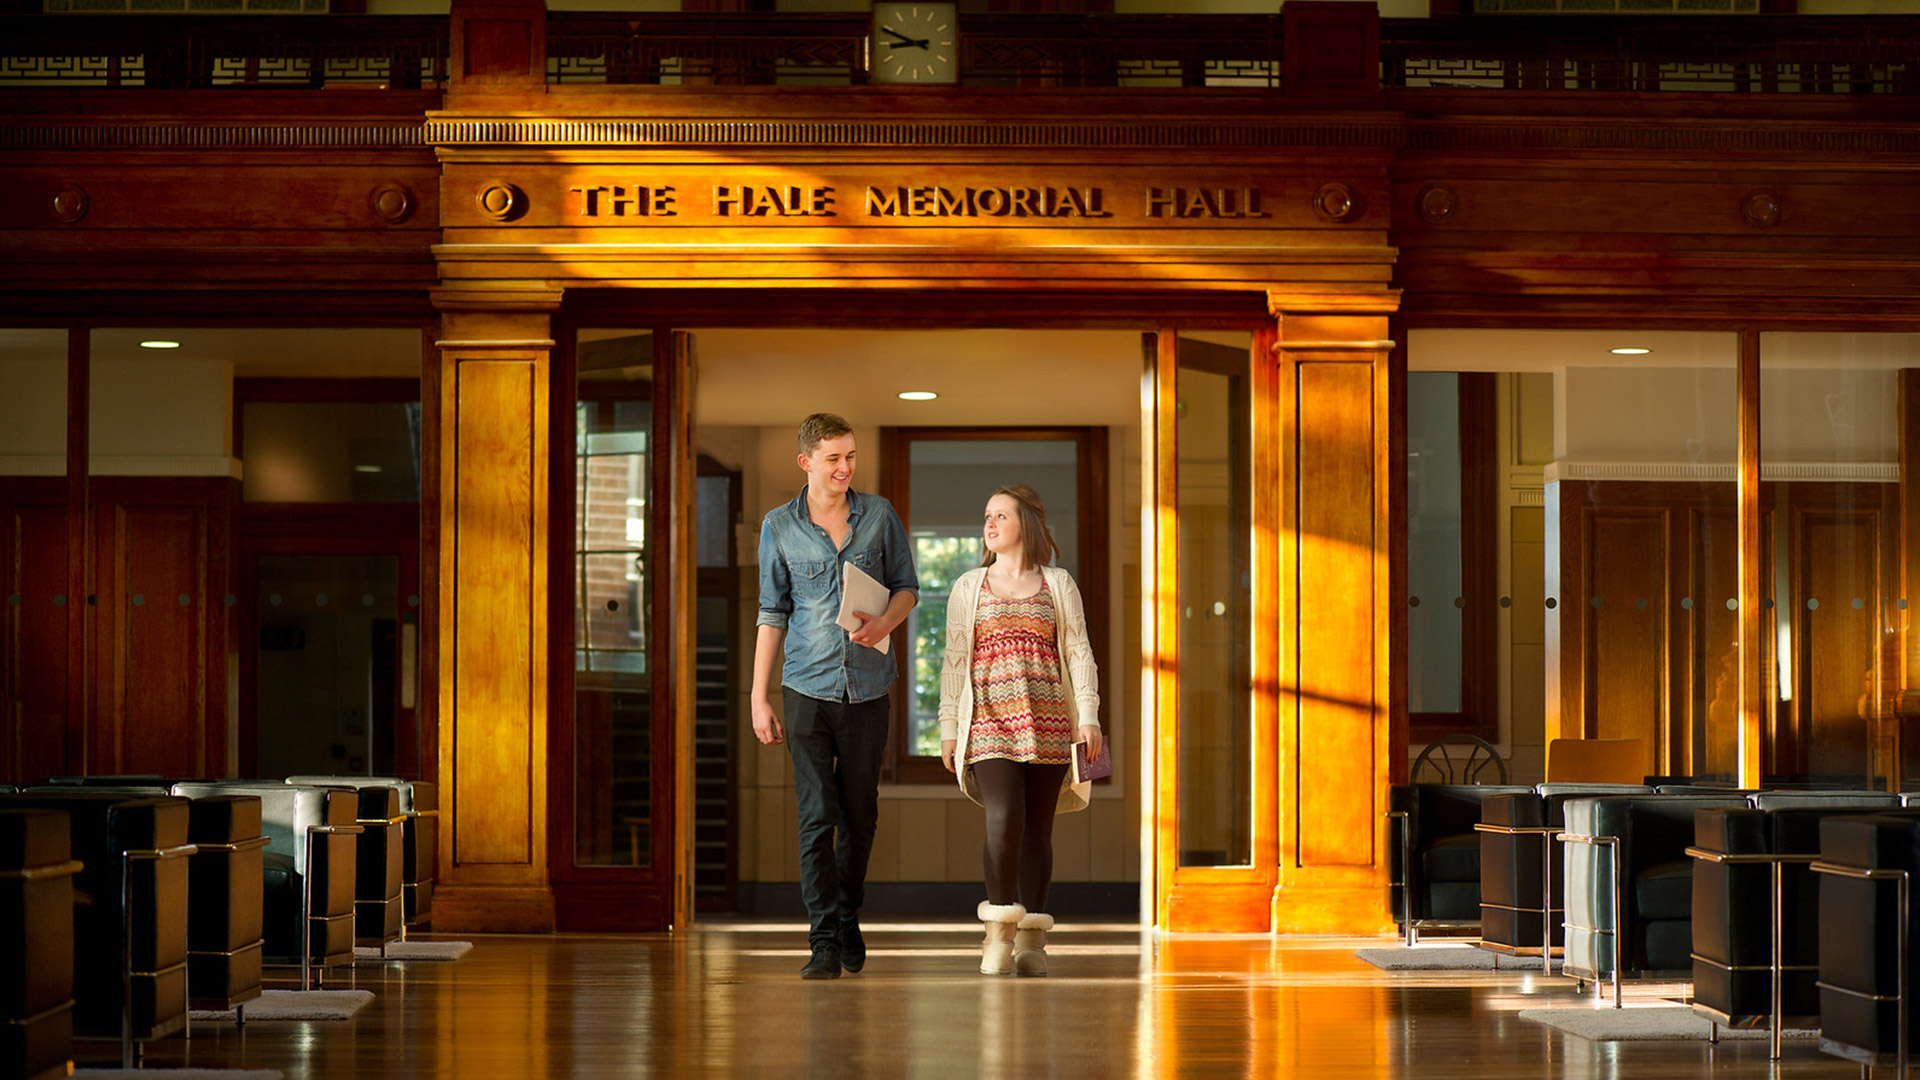 Two students walk together through hale hall